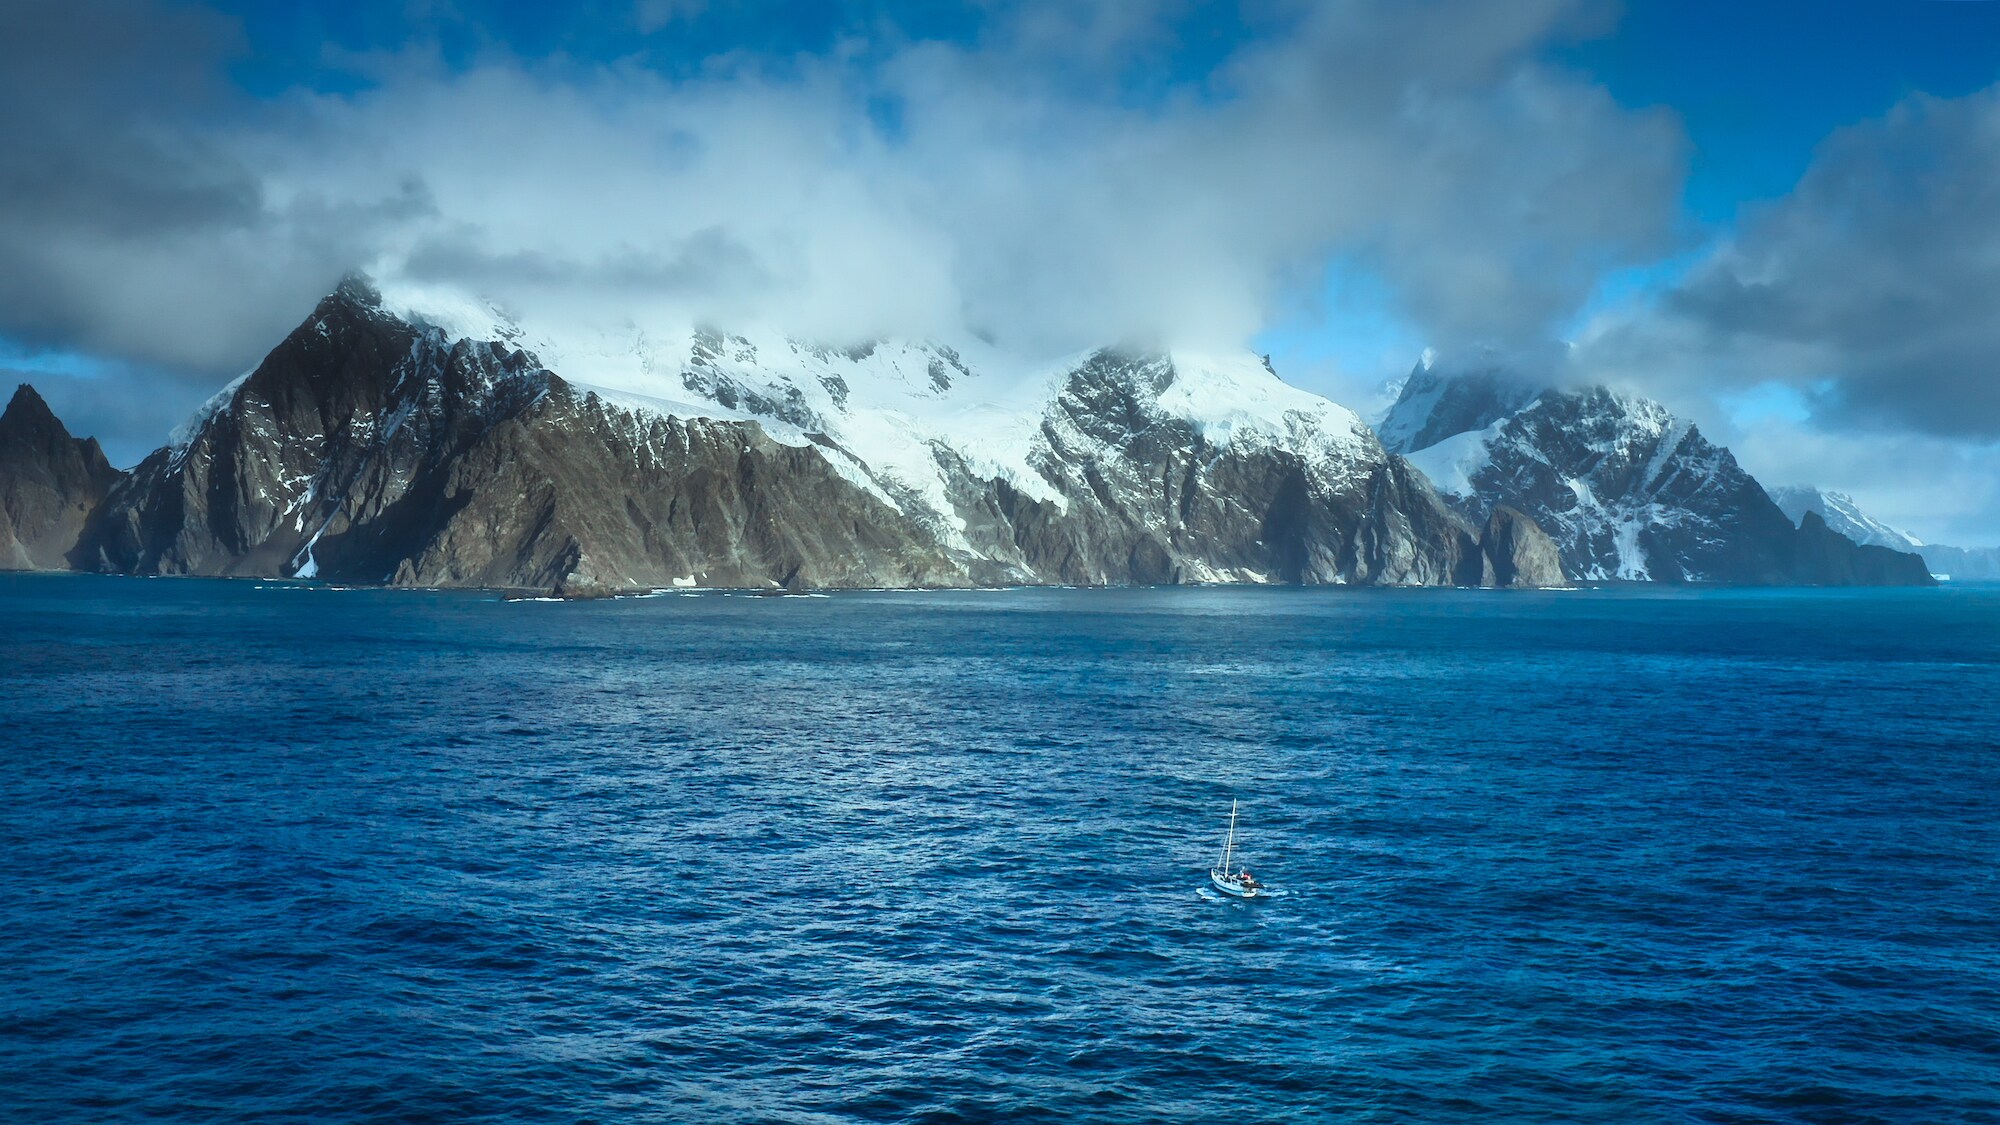 The crew seeks refuge from the brutal Antarctic weather behind Elephant Island. (Credit: National Geographic/Bertie Gregory for Disney+)